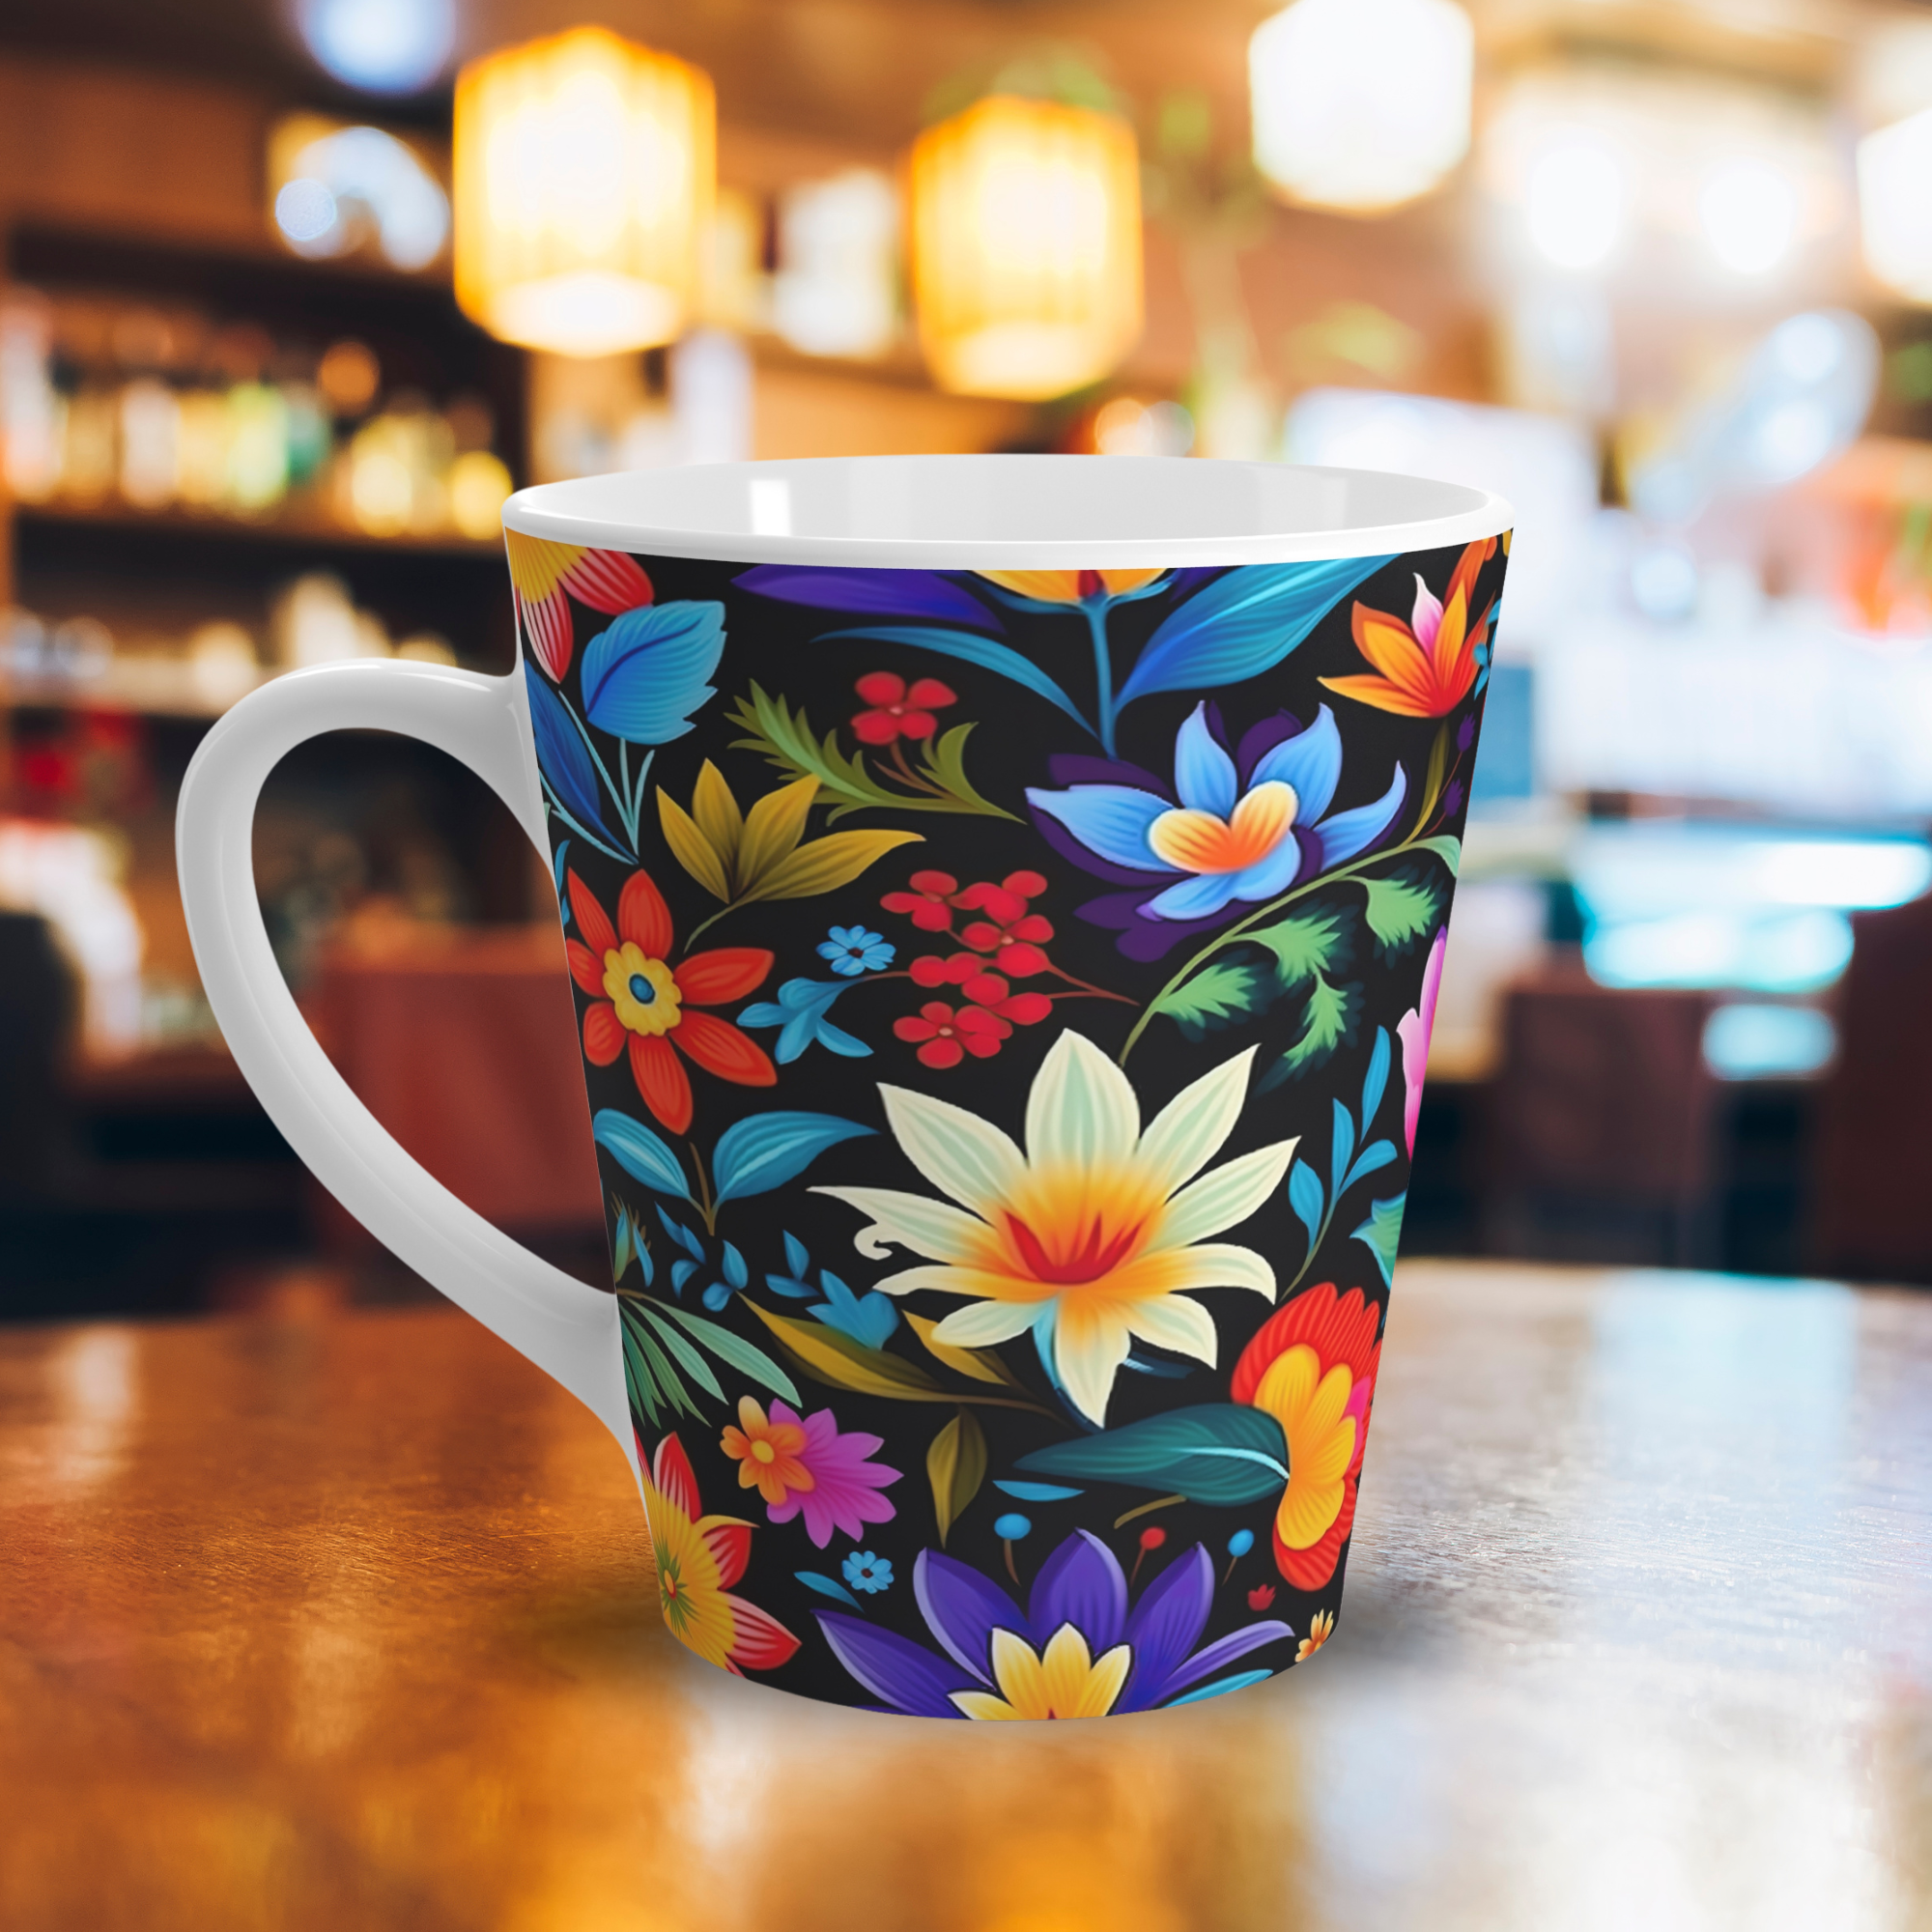 Latte Mug with Beautiful Floral Design, Pink and Orange Flower Coffee Cup with Black Background